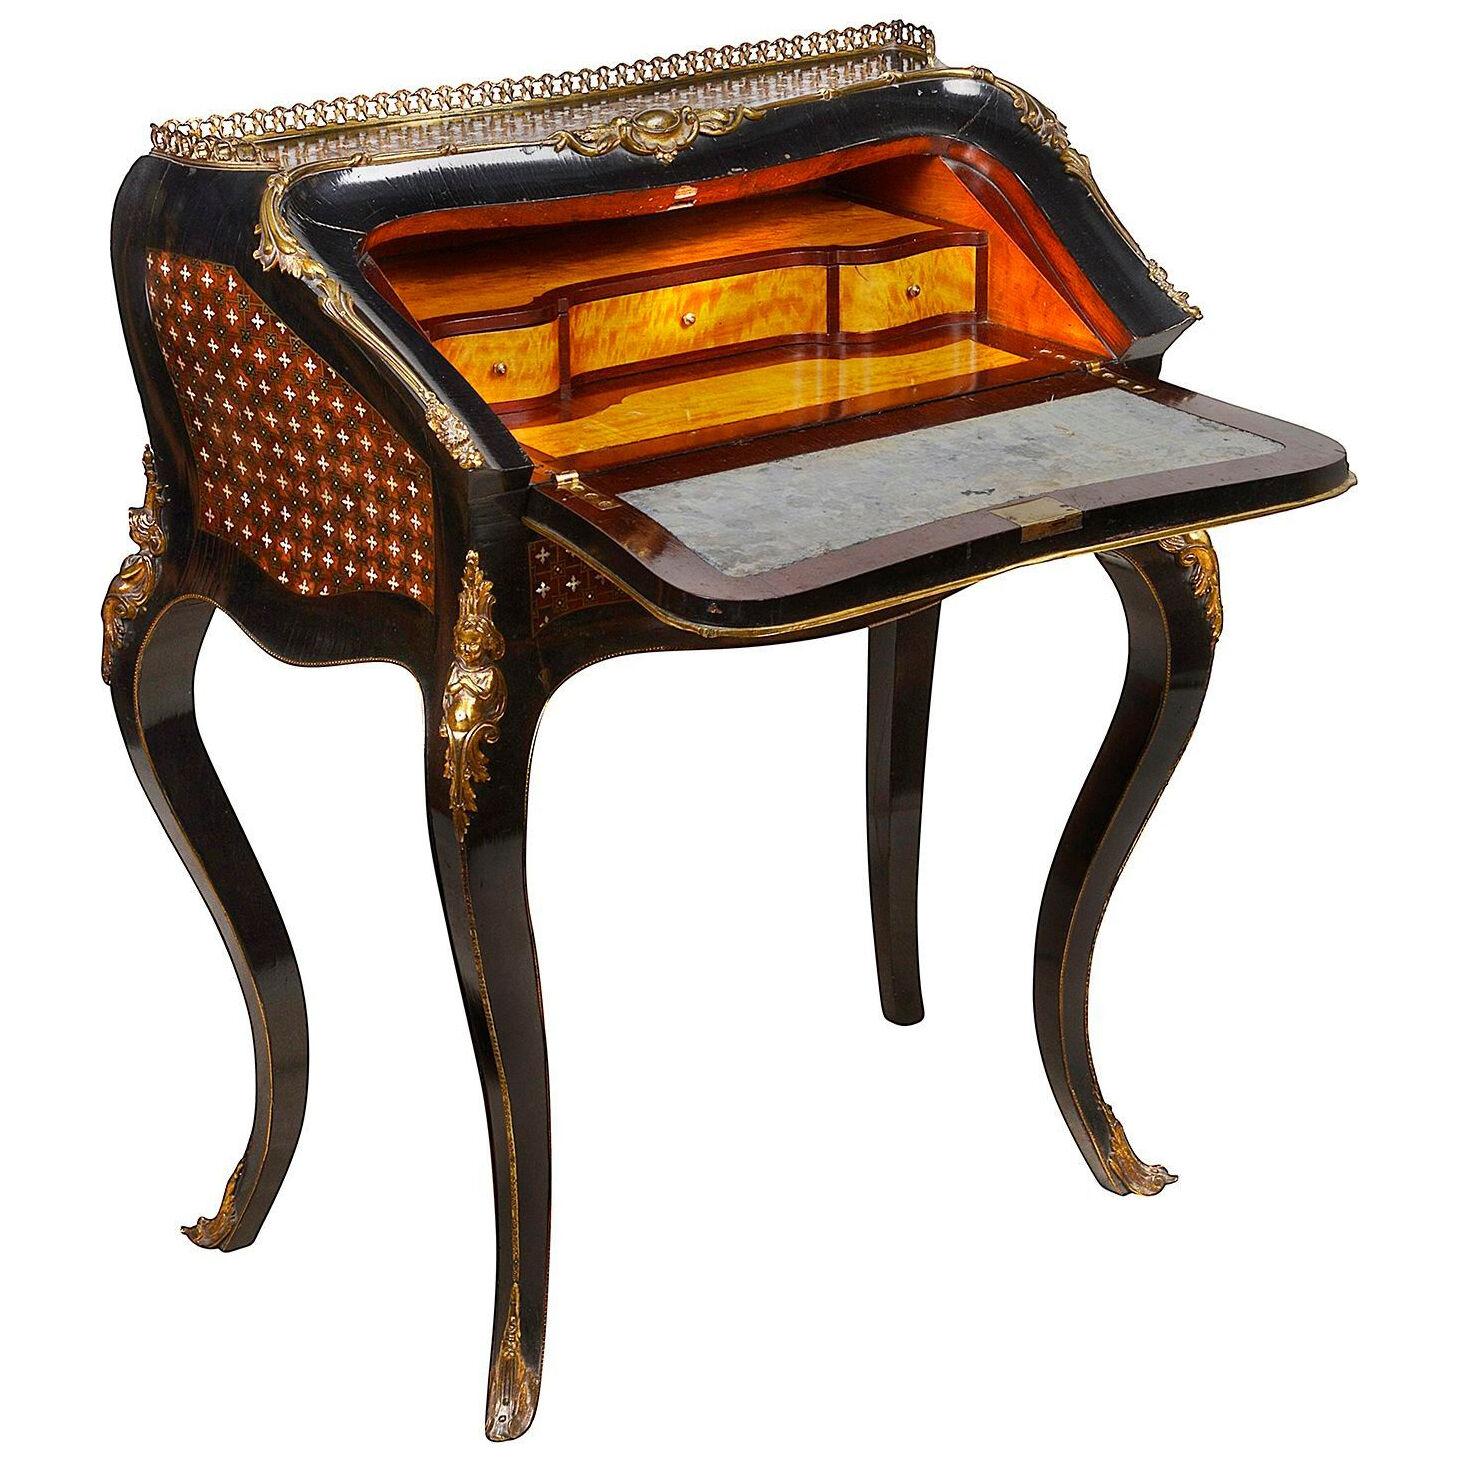 A French mother of pearl inlaid ladies bureau, 19th Century